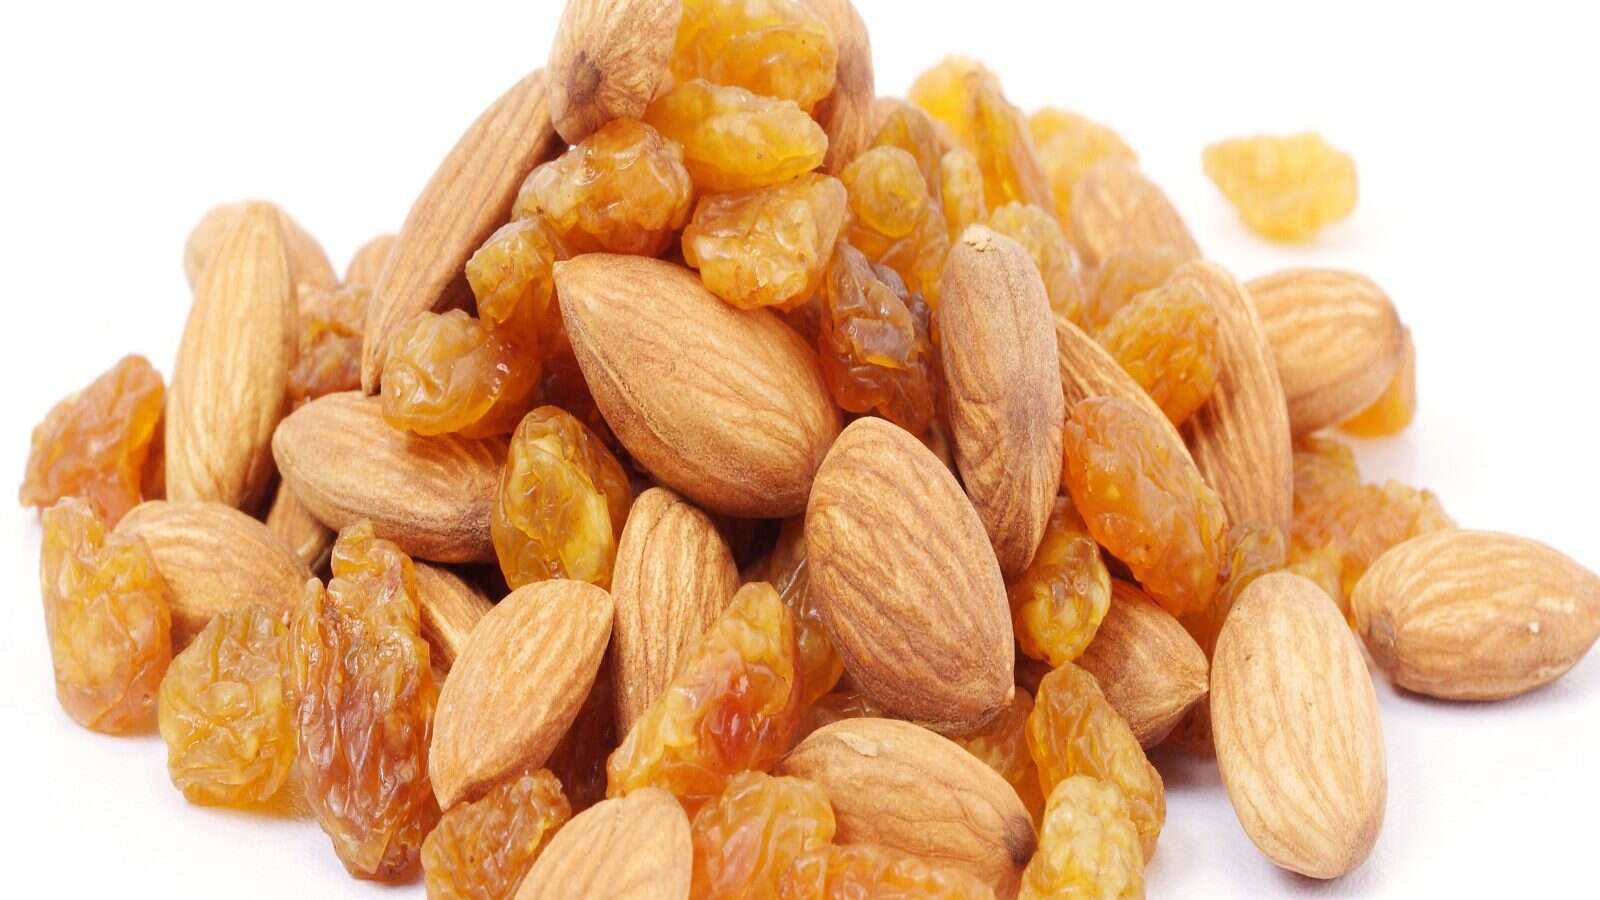 Eating Almond and Raisins together is beneficial for health, know the right time and way to consume them